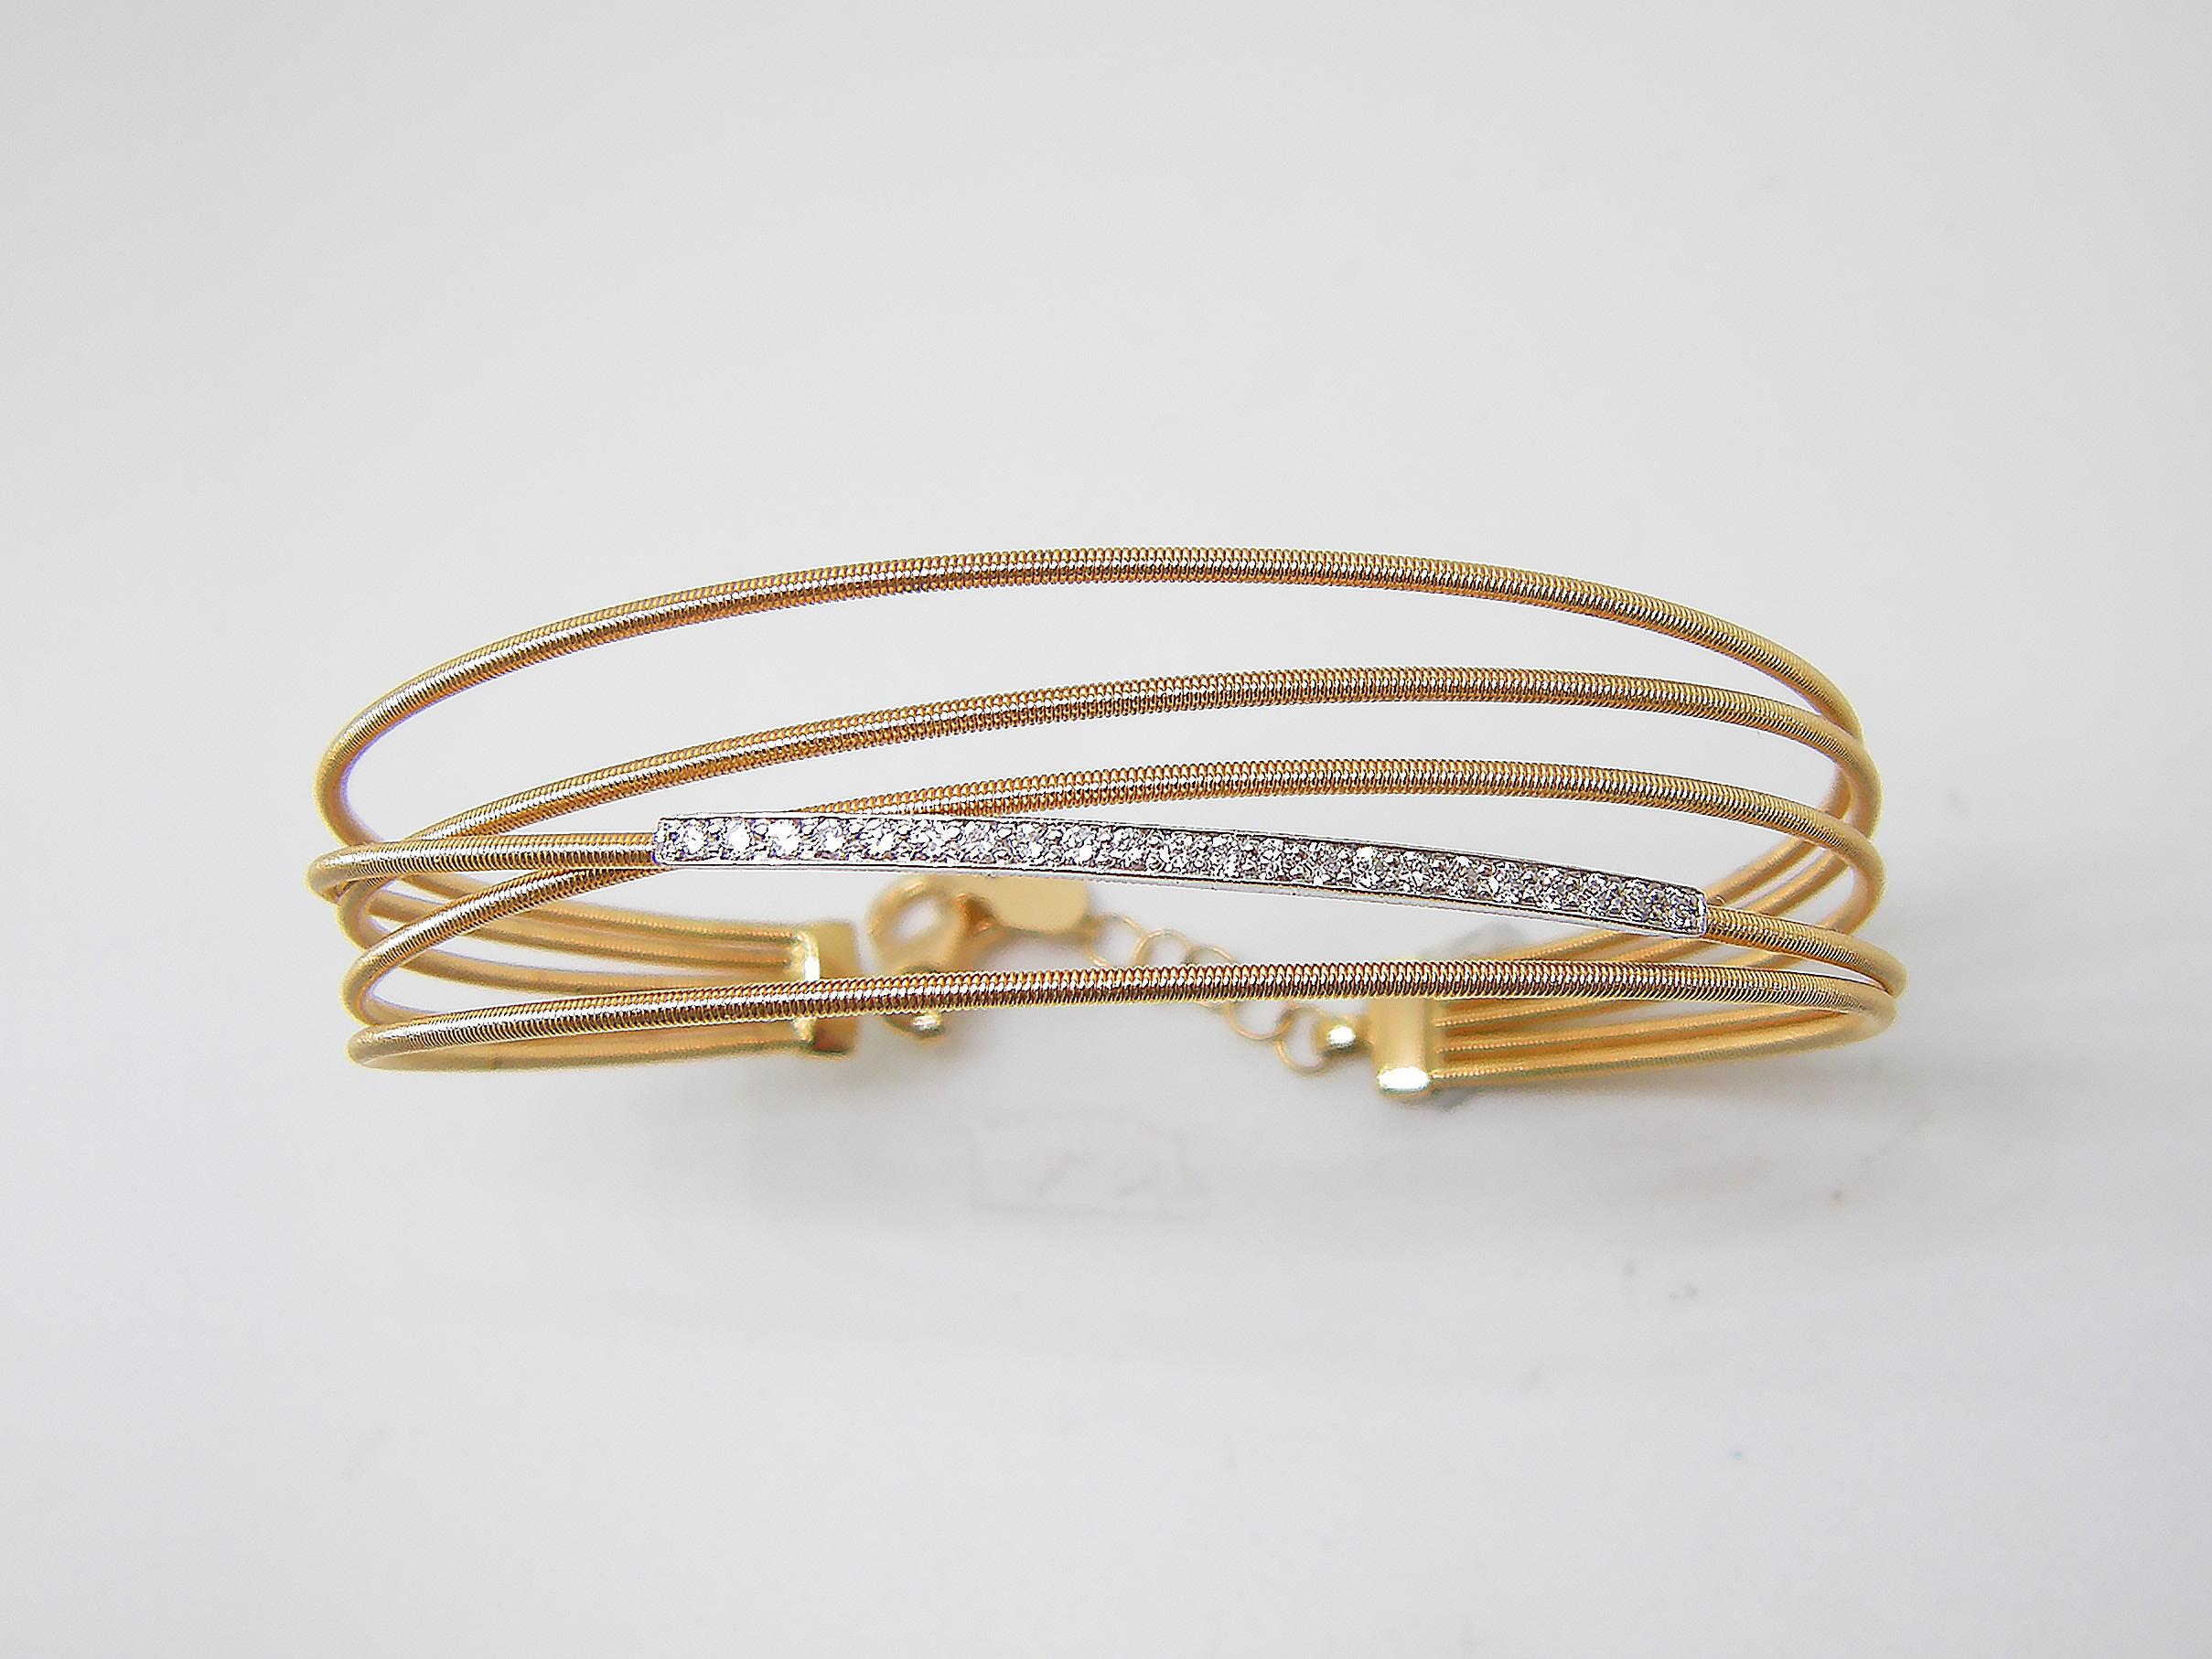 S.Georgios designer flexible multi layers bangle cuff bracelet is custom made of Yellow and White gold 18 karats. The gorgeous cuff has brilliant cut white diamonds total weight of 0.30 Carat set microscopically.
We also make this stunning piece in